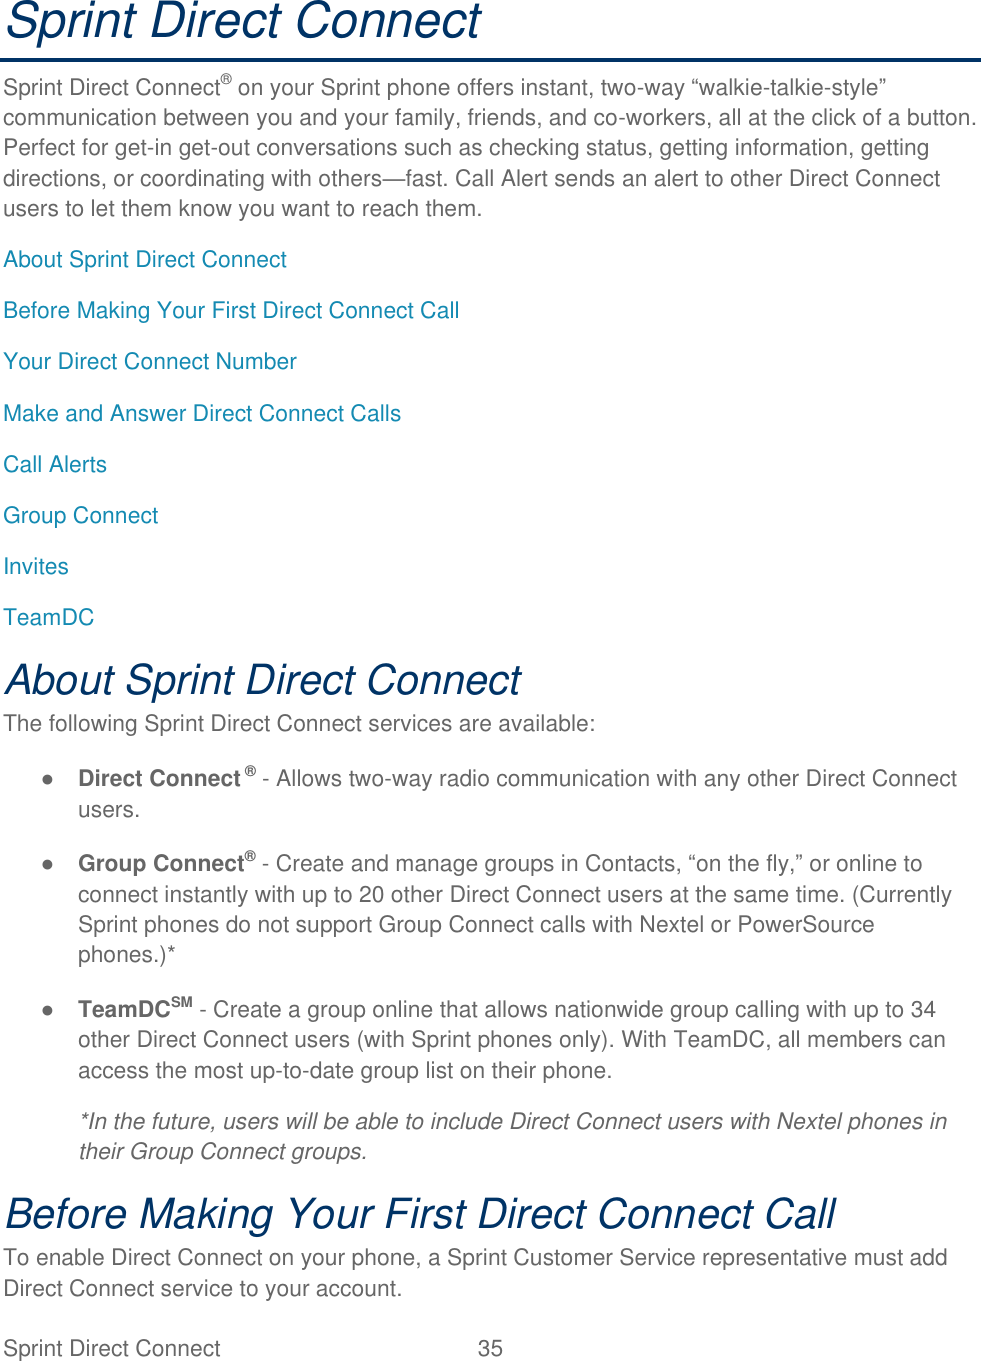  Sprint Direct Connect  35   Sprint Direct Connect Sprint Direct Connect® on your Sprint phone offers instant, two-way ―walkie-talkie-style‖ communication between you and your family, friends, and co-workers, all at the click of a button. Perfect for get-in get-out conversations such as checking status, getting information, getting directions, or coordinating with others—fast. Call Alert sends an alert to other Direct Connect users to let them know you want to reach them. About Sprint Direct Connect Before Making Your First Direct Connect Call Your Direct Connect Number Make and Answer Direct Connect Calls Call Alerts Group Connect Invites TeamDC About Sprint Direct Connect The following Sprint Direct Connect services are available: ● Direct Connect ® - Allows two-way radio communication with any other Direct Connect users. ● Group Connect® - Create and manage groups in Contacts, ―on the fly,‖ or online to connect instantly with up to 20 other Direct Connect users at the same time. (Currently Sprint phones do not support Group Connect calls with Nextel or PowerSource phones.)* ● TeamDCSM - Create a group online that allows nationwide group calling with up to 34 other Direct Connect users (with Sprint phones only). With TeamDC, all members can access the most up-to-date group list on their phone. *In the future, users will be able to include Direct Connect users with Nextel phones in their Group Connect groups. Before Making Your First Direct Connect Call To enable Direct Connect on your phone, a Sprint Customer Service representative must add Direct Connect service to your account. 